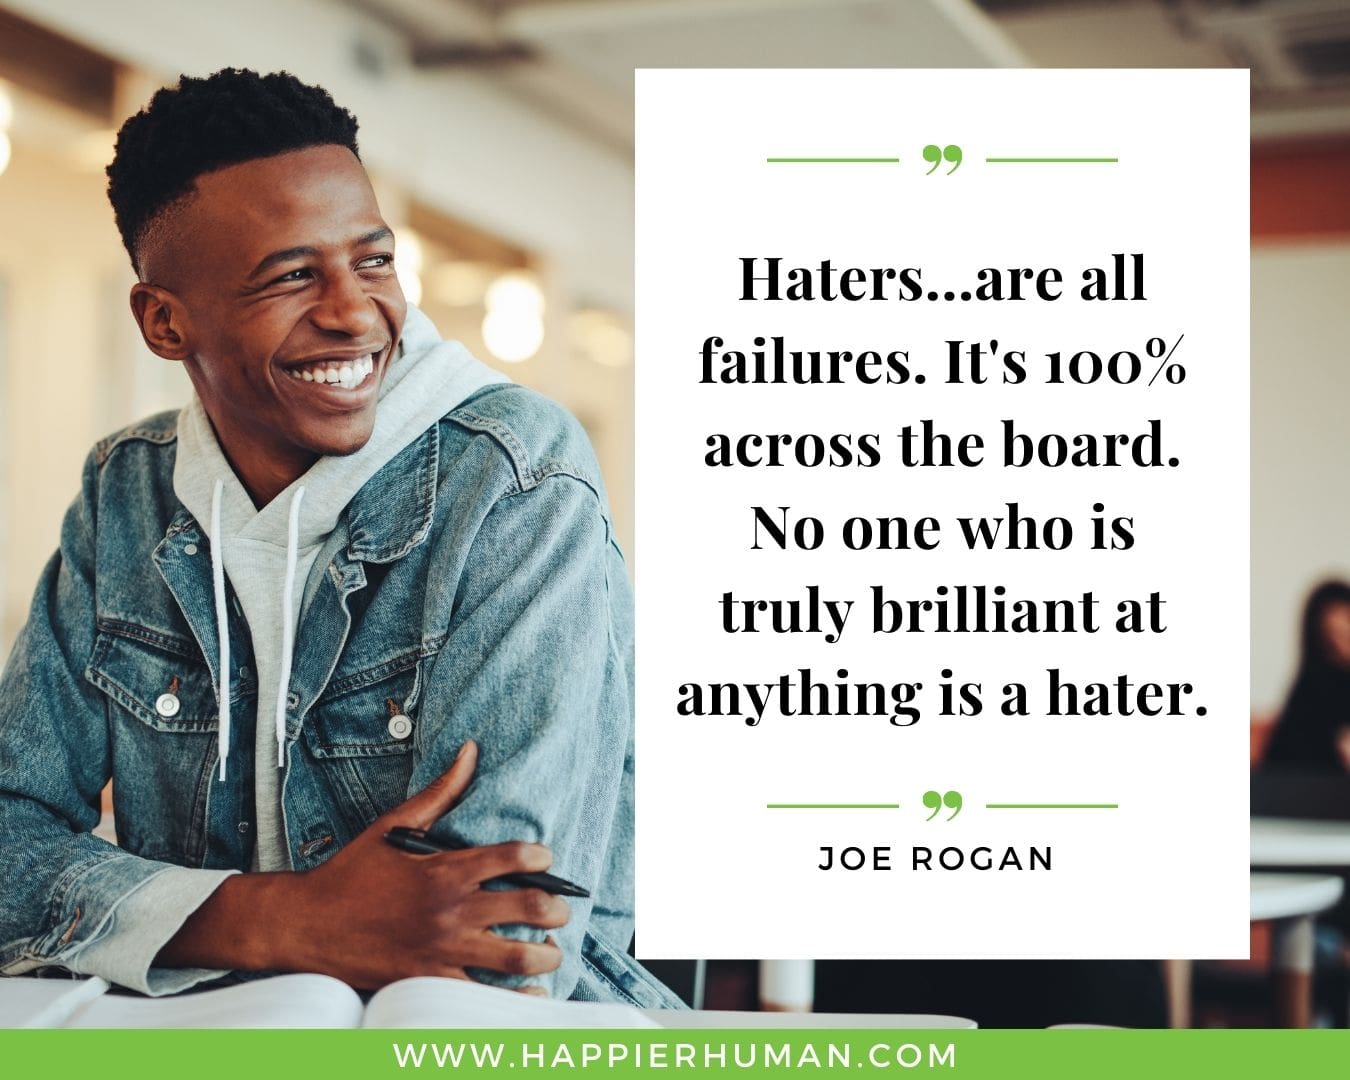 Haters Quotes - “Haters...are all failures. It's 100% across the board. No one who is truly brilliant at anything is a hater.” - Joe Rogan